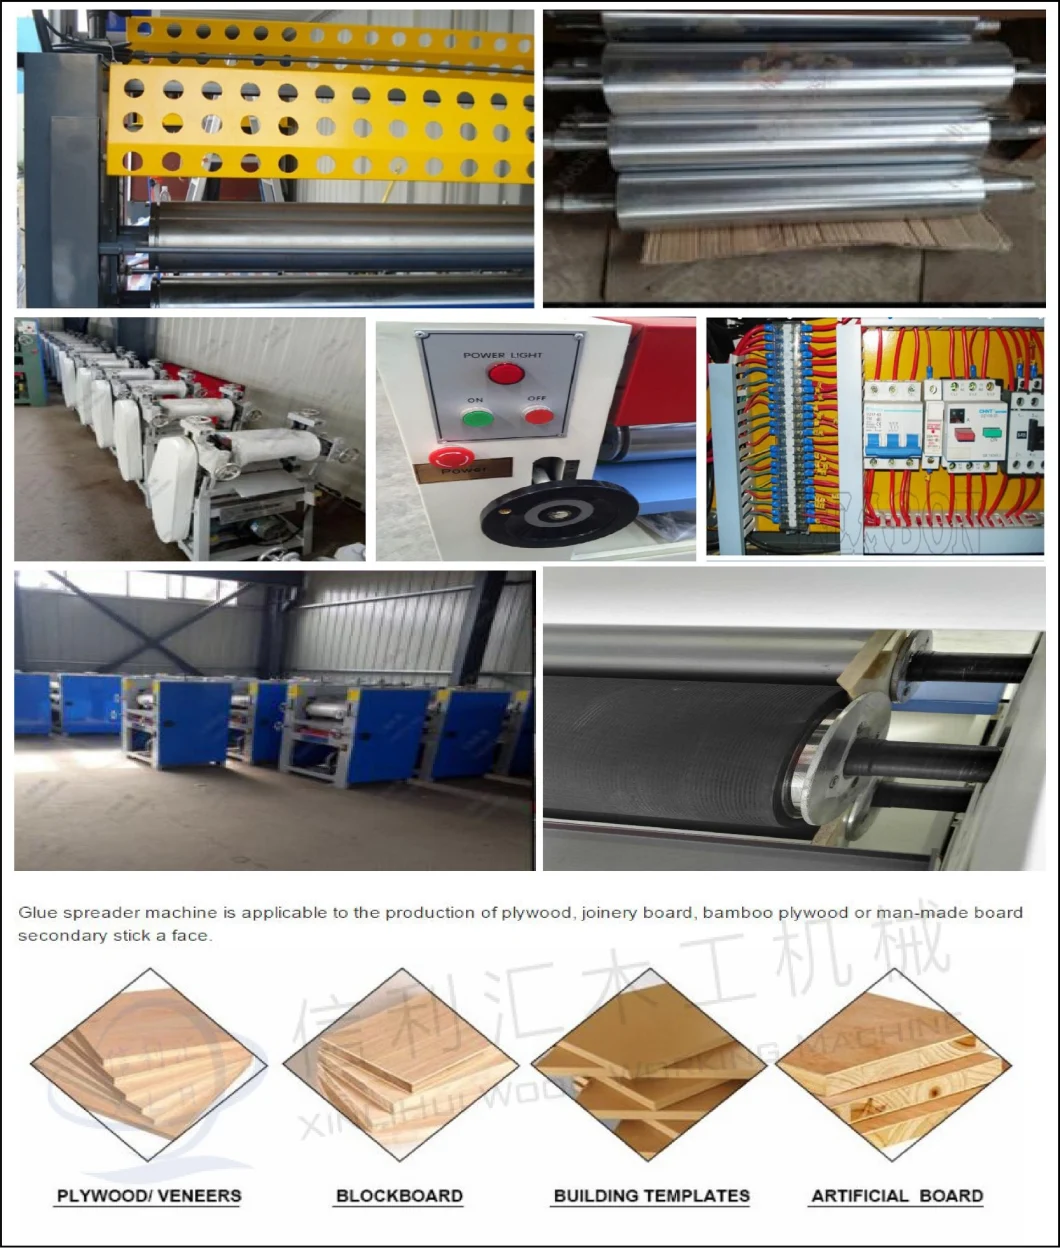 Double Sided Glue Spreader for Ply and MDF Panels, Glue Spreader Machine, Glue Backing Flooring, Flooring Glue Spreader, 600mm Flooring Glue Spreader